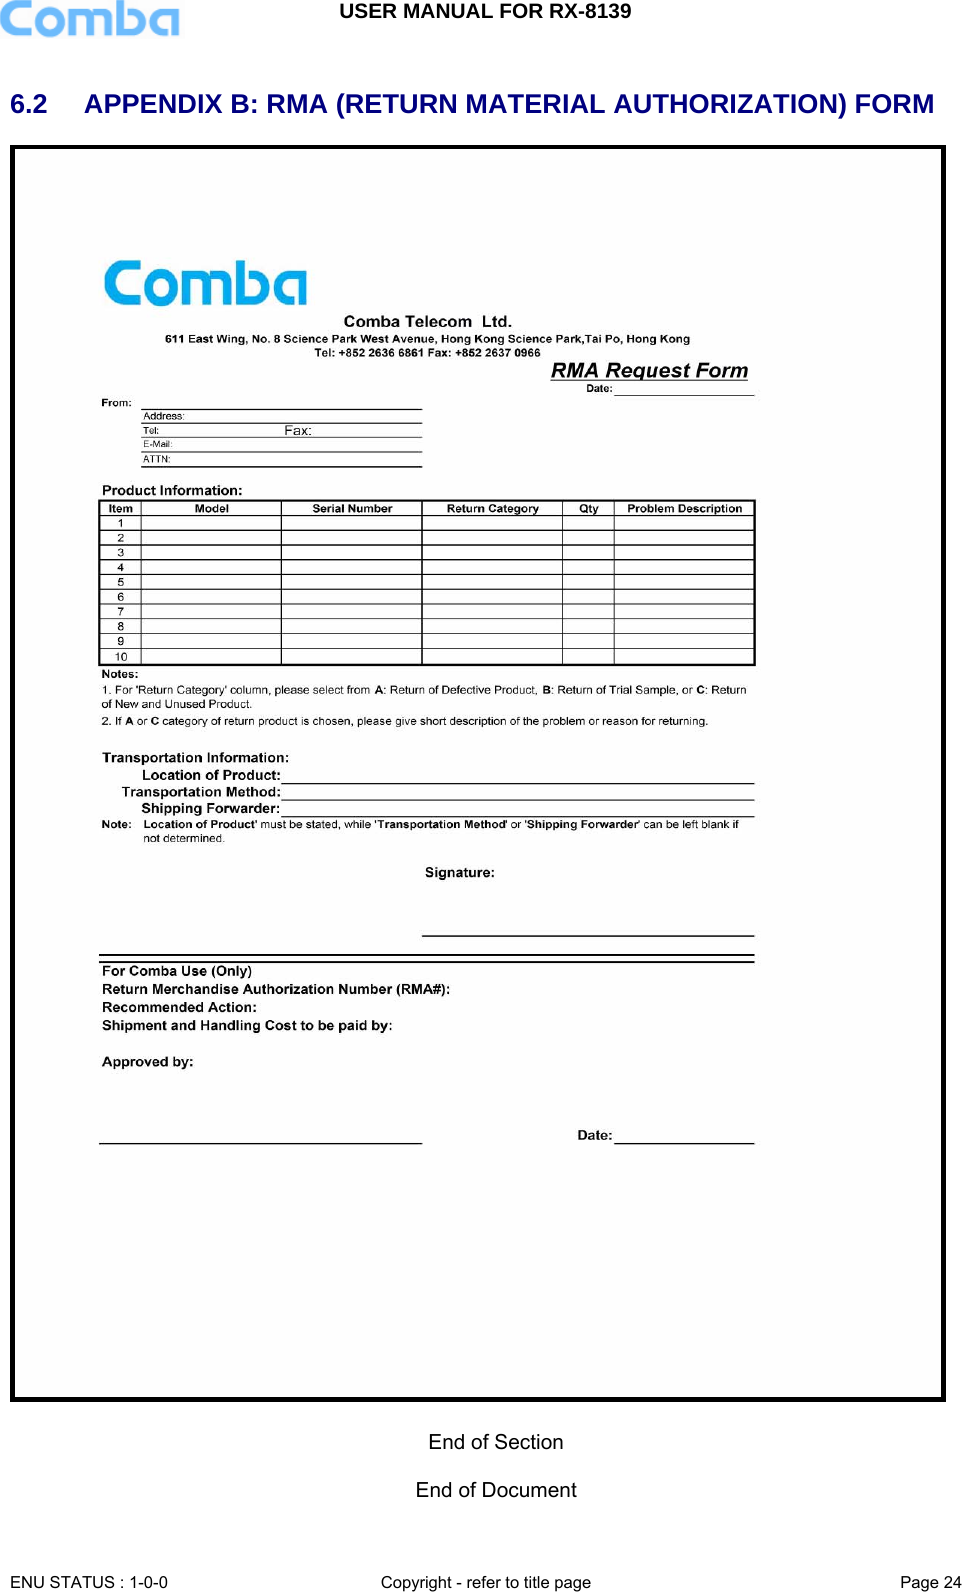 USER MANUAL FOR RX-8139    ENU STATUS : 1-0-0  Copyright - refer to title page  Page 24   6.2  APPENDIX B: RMA (RETURN MATERIAL AUTHORIZATION) FORM   End of Section  End of Document  